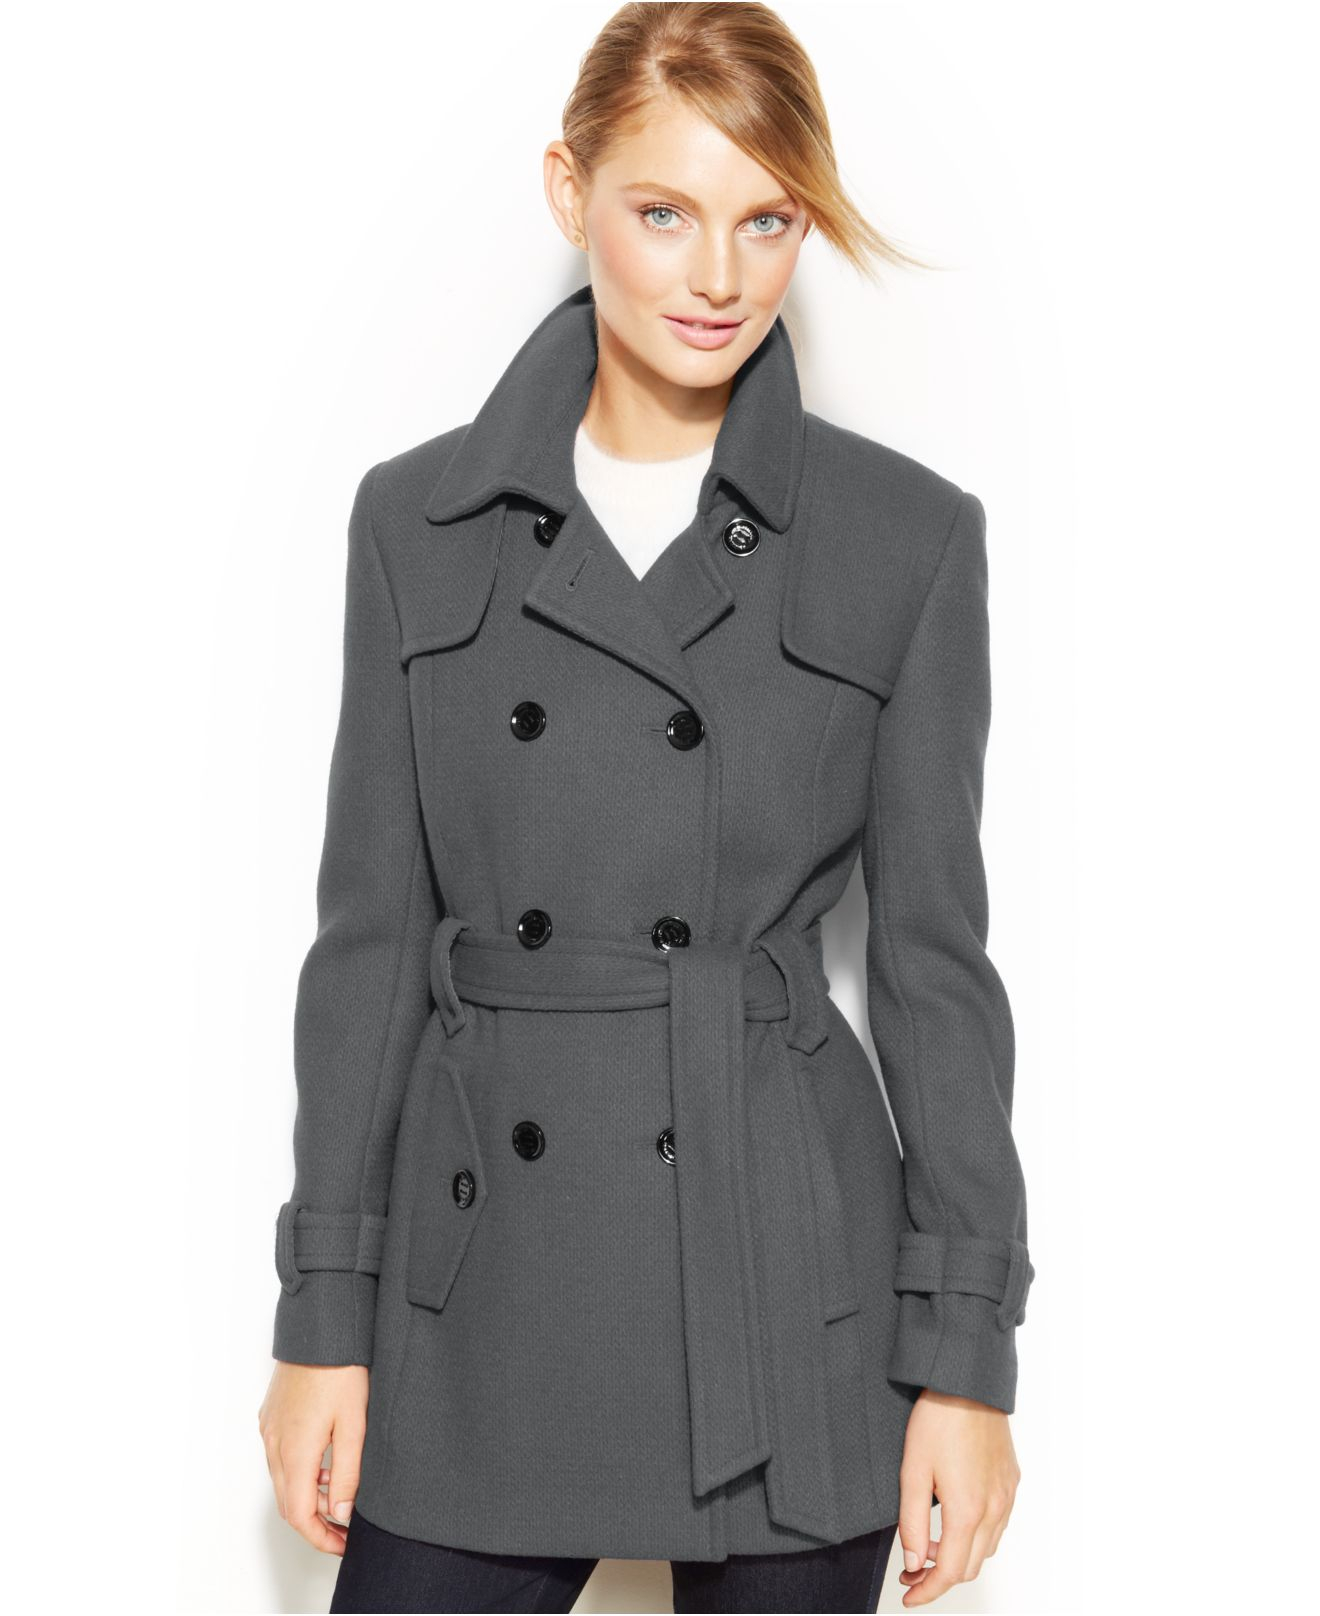 Lyst - Calvin Klein Double-Breasted Belted Pea Coat in Gray